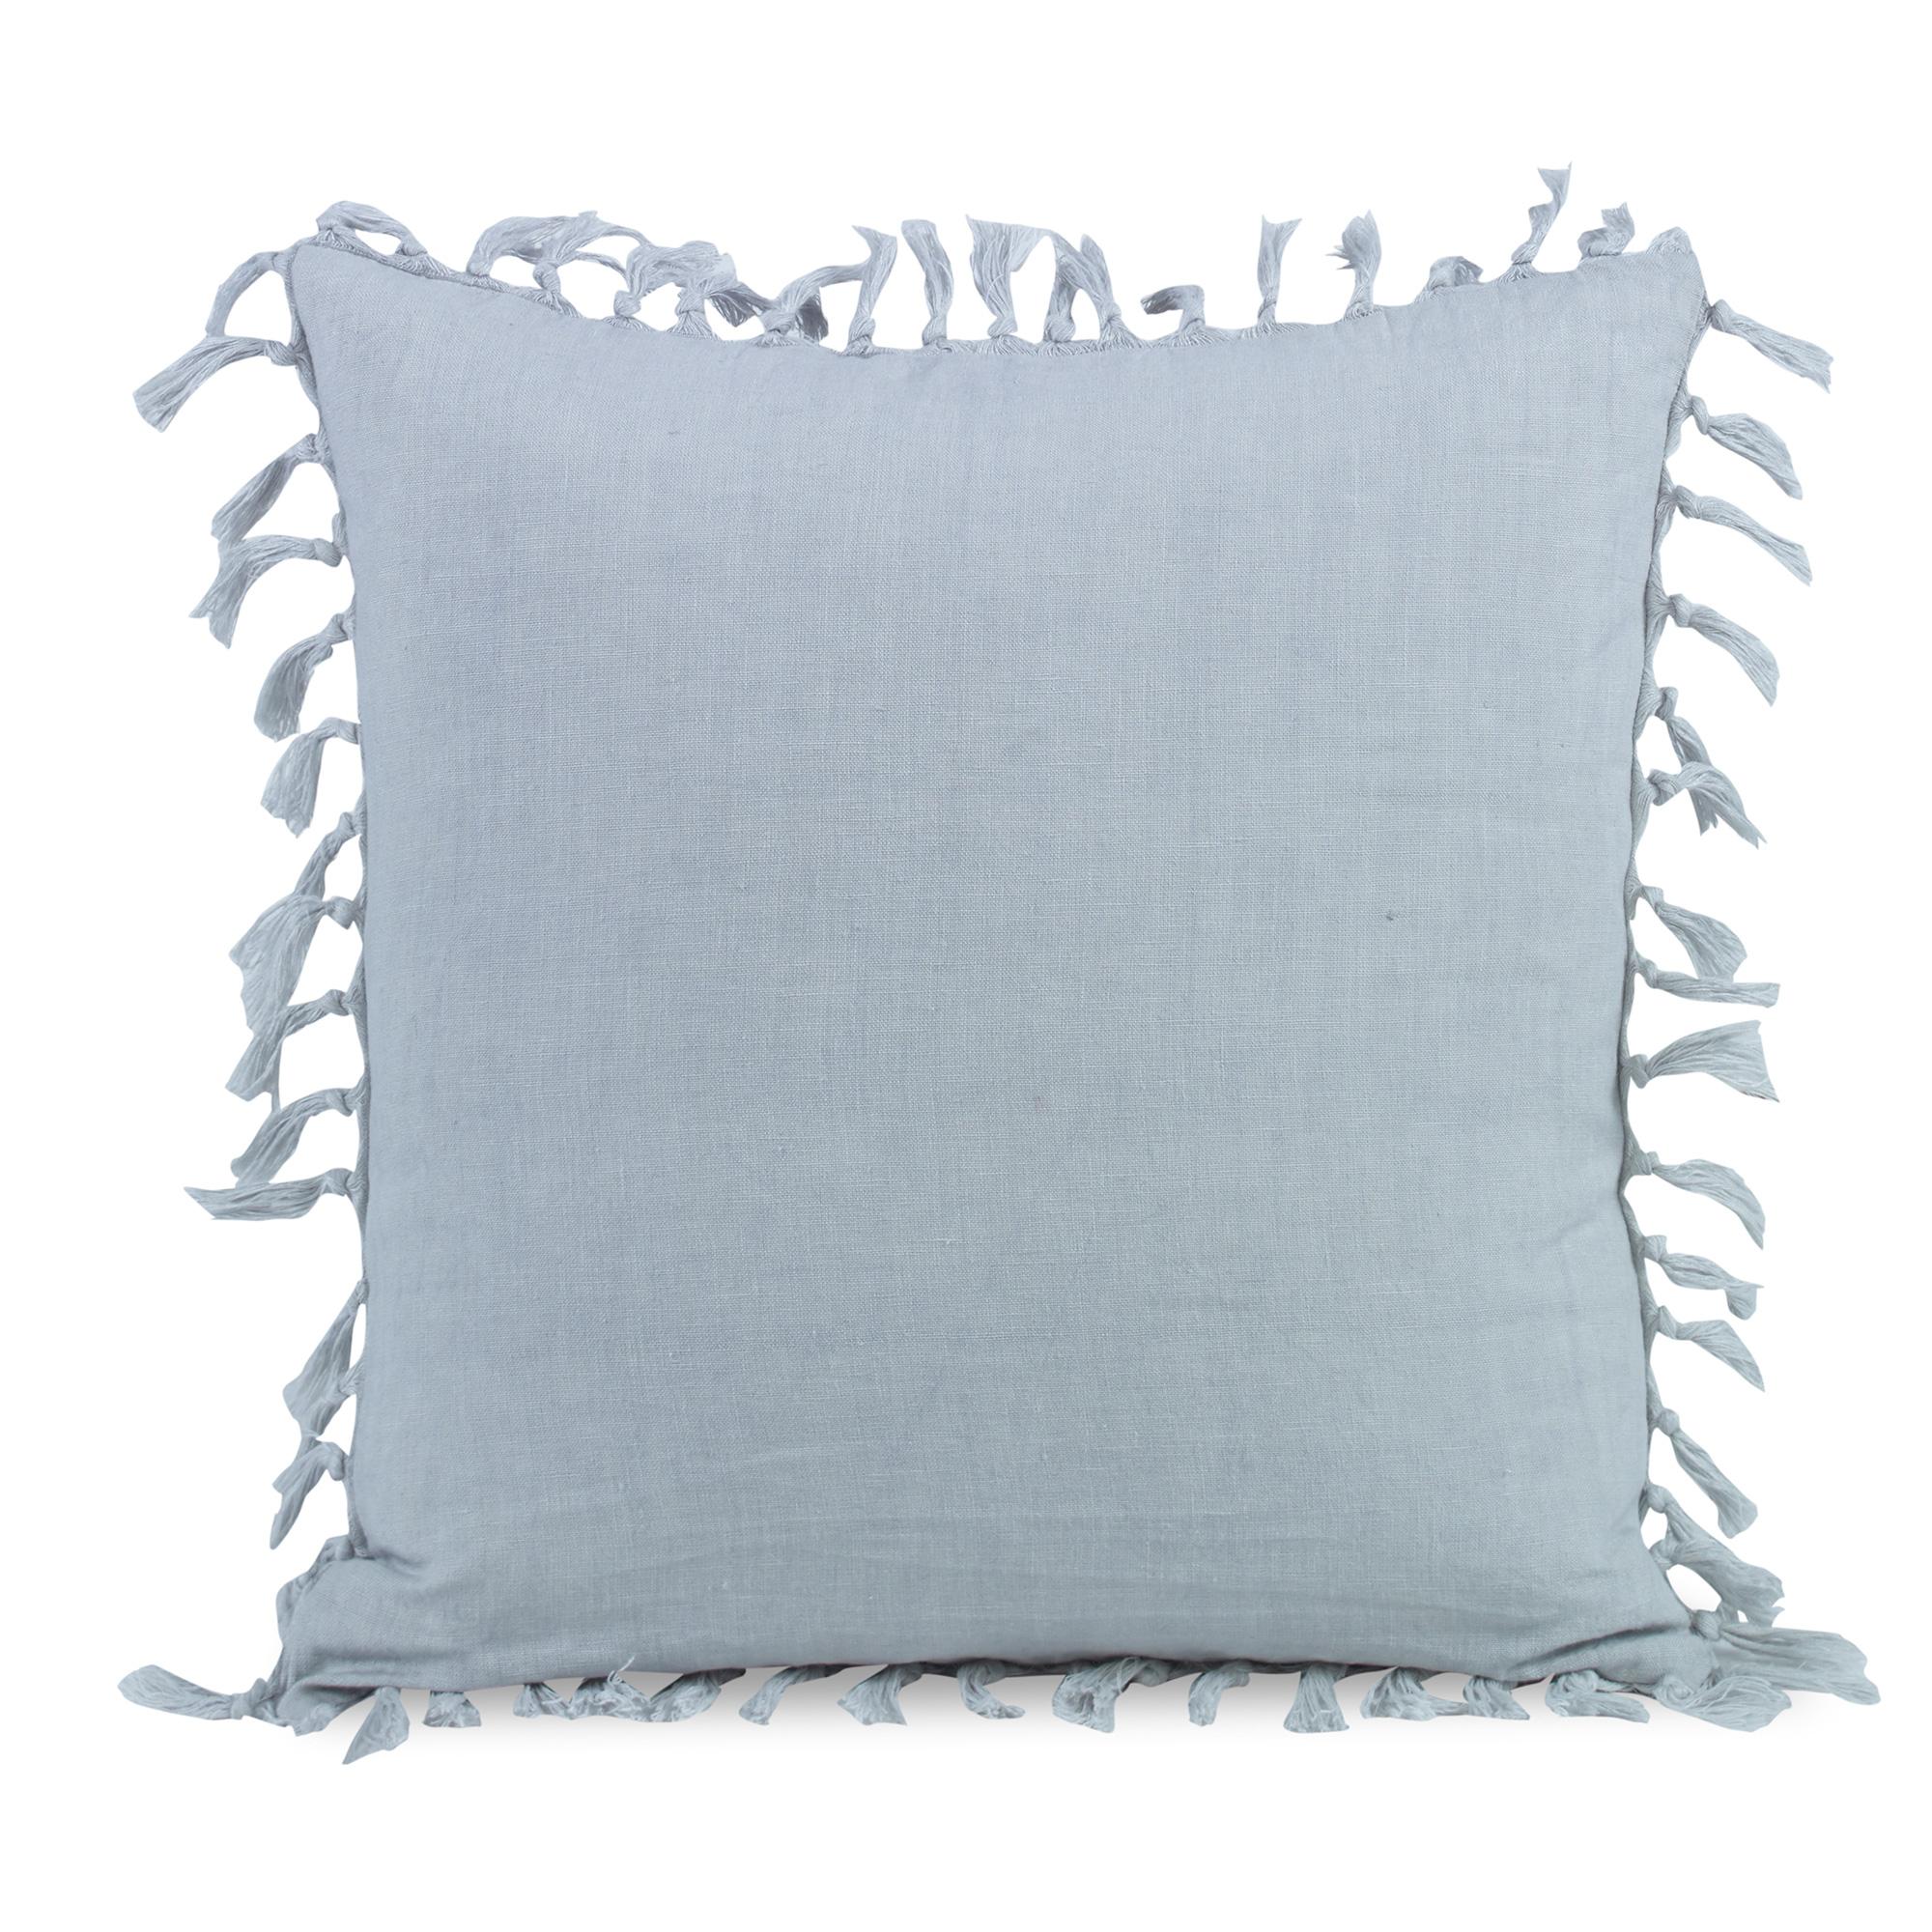 Gray (QR-19255.GRAYBLU.0) Zoysia Linen Decorative Accent Pillow with Fringe by CuratedKravet